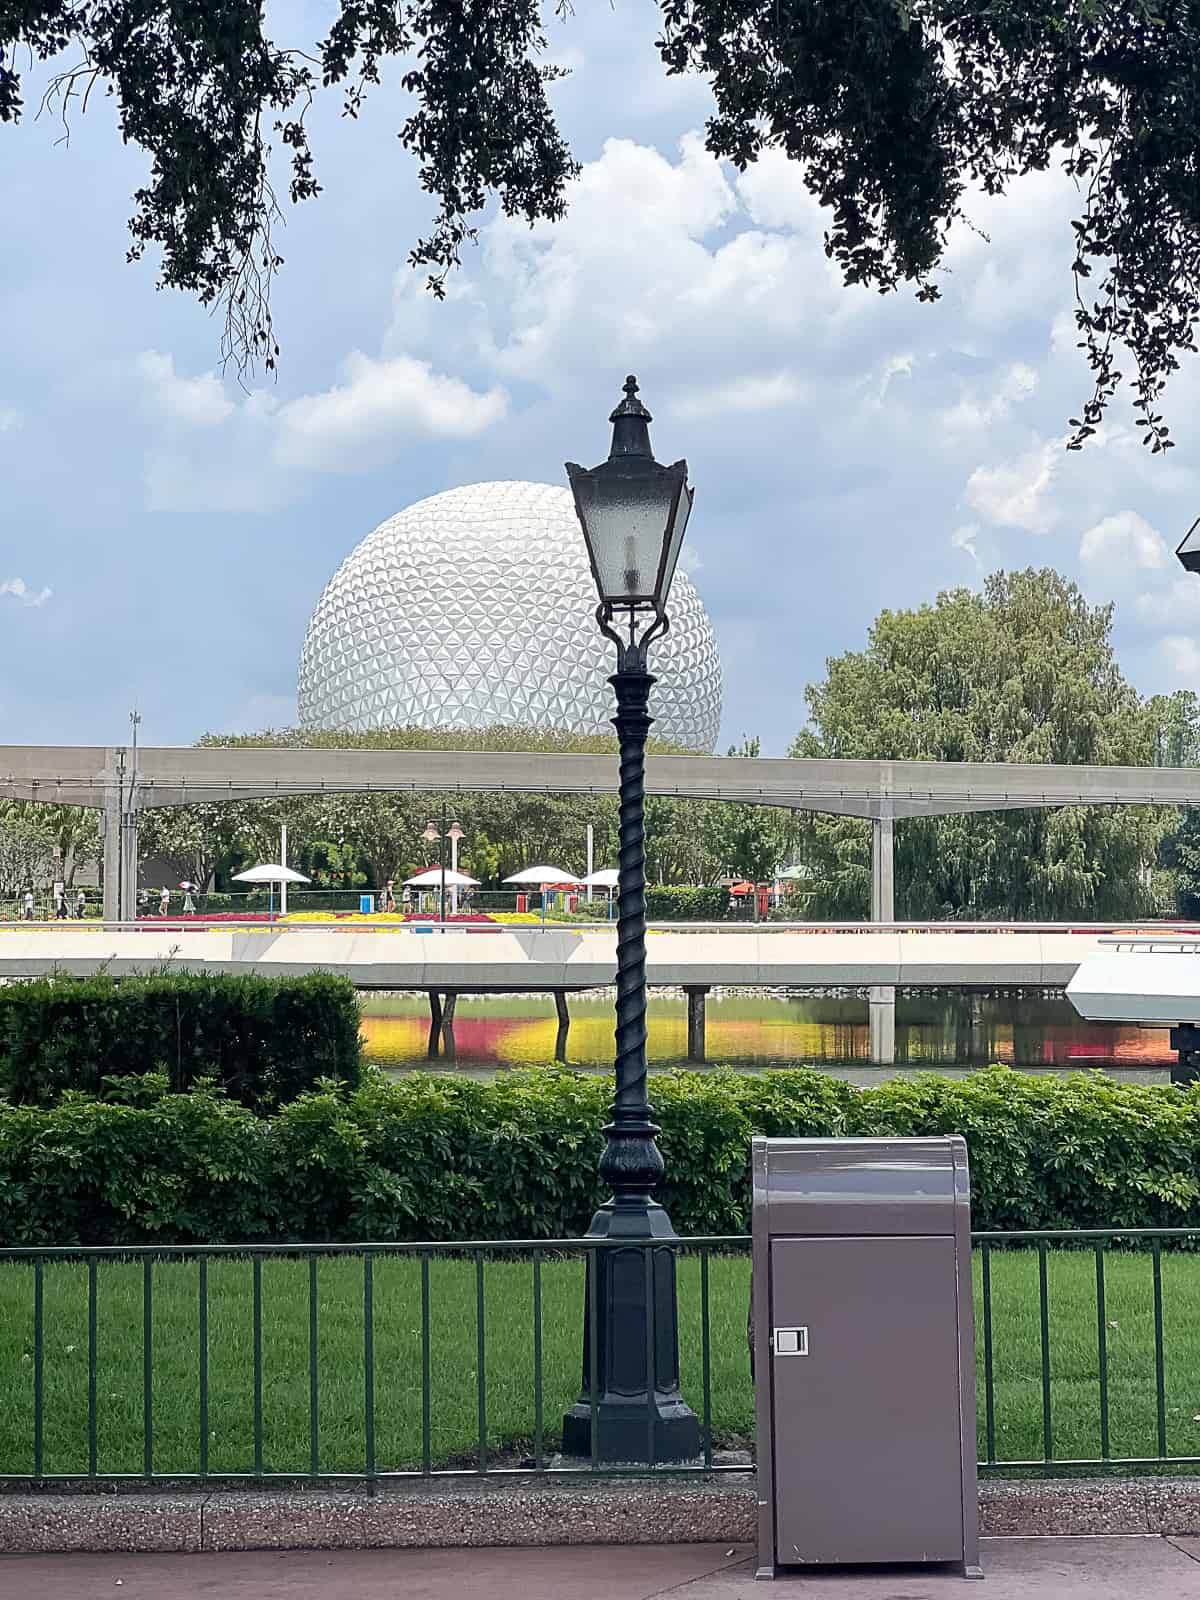 View of Spaceship Earth Epcot Ball at Disney World